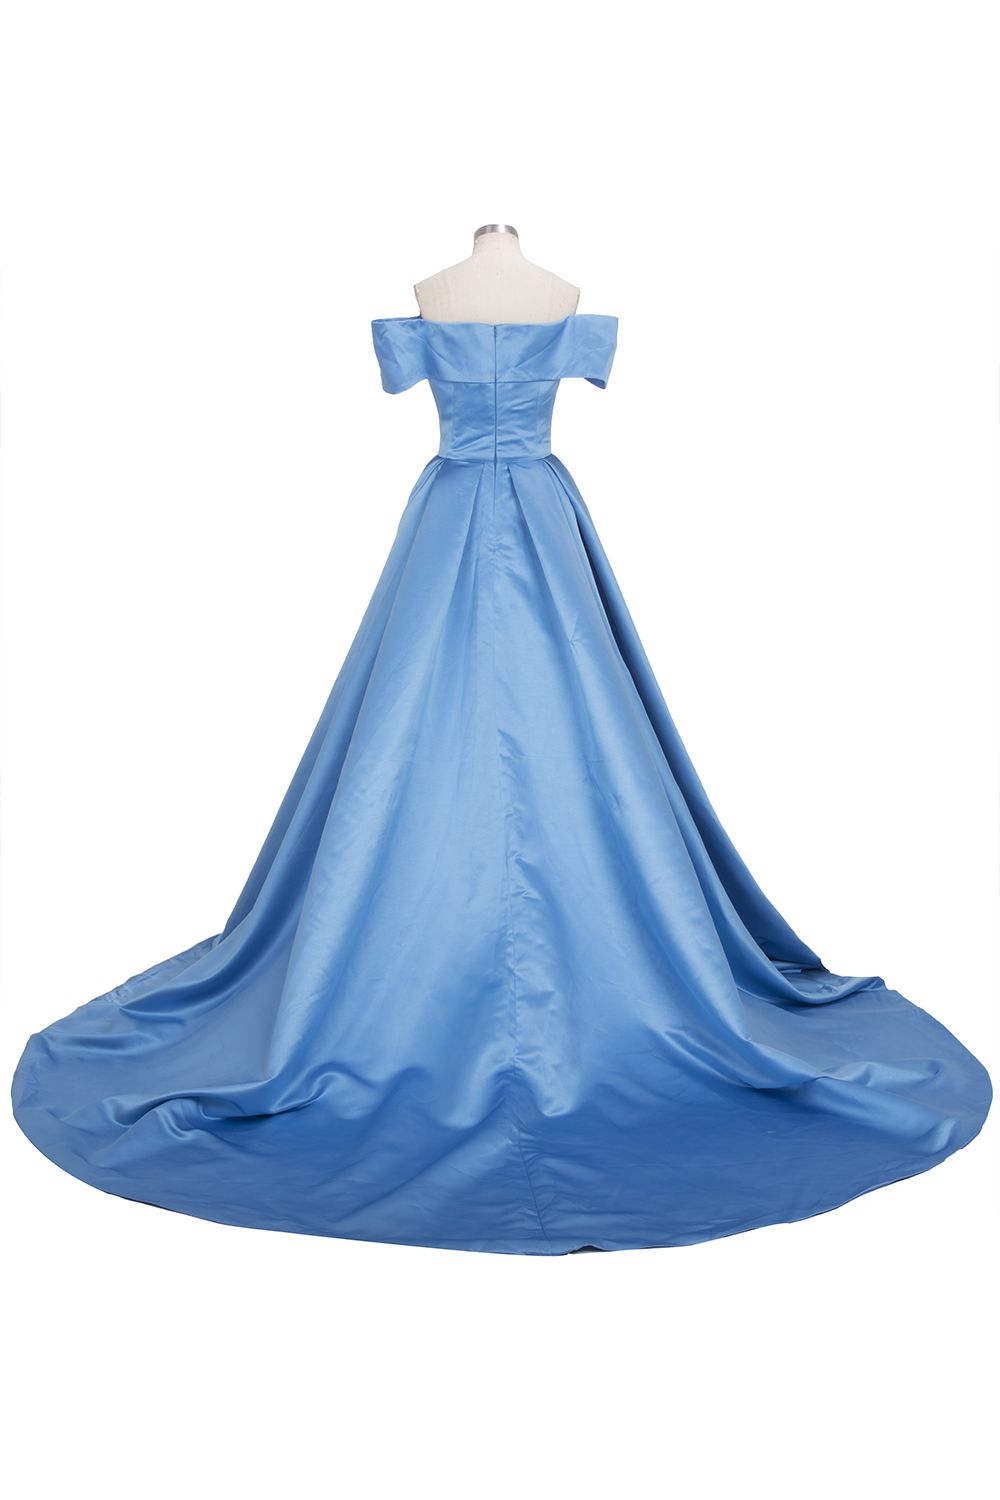 Long Ball Gown Off-shoulder Satin Blue Prom Dresses with Slit-BIZTUNNEL